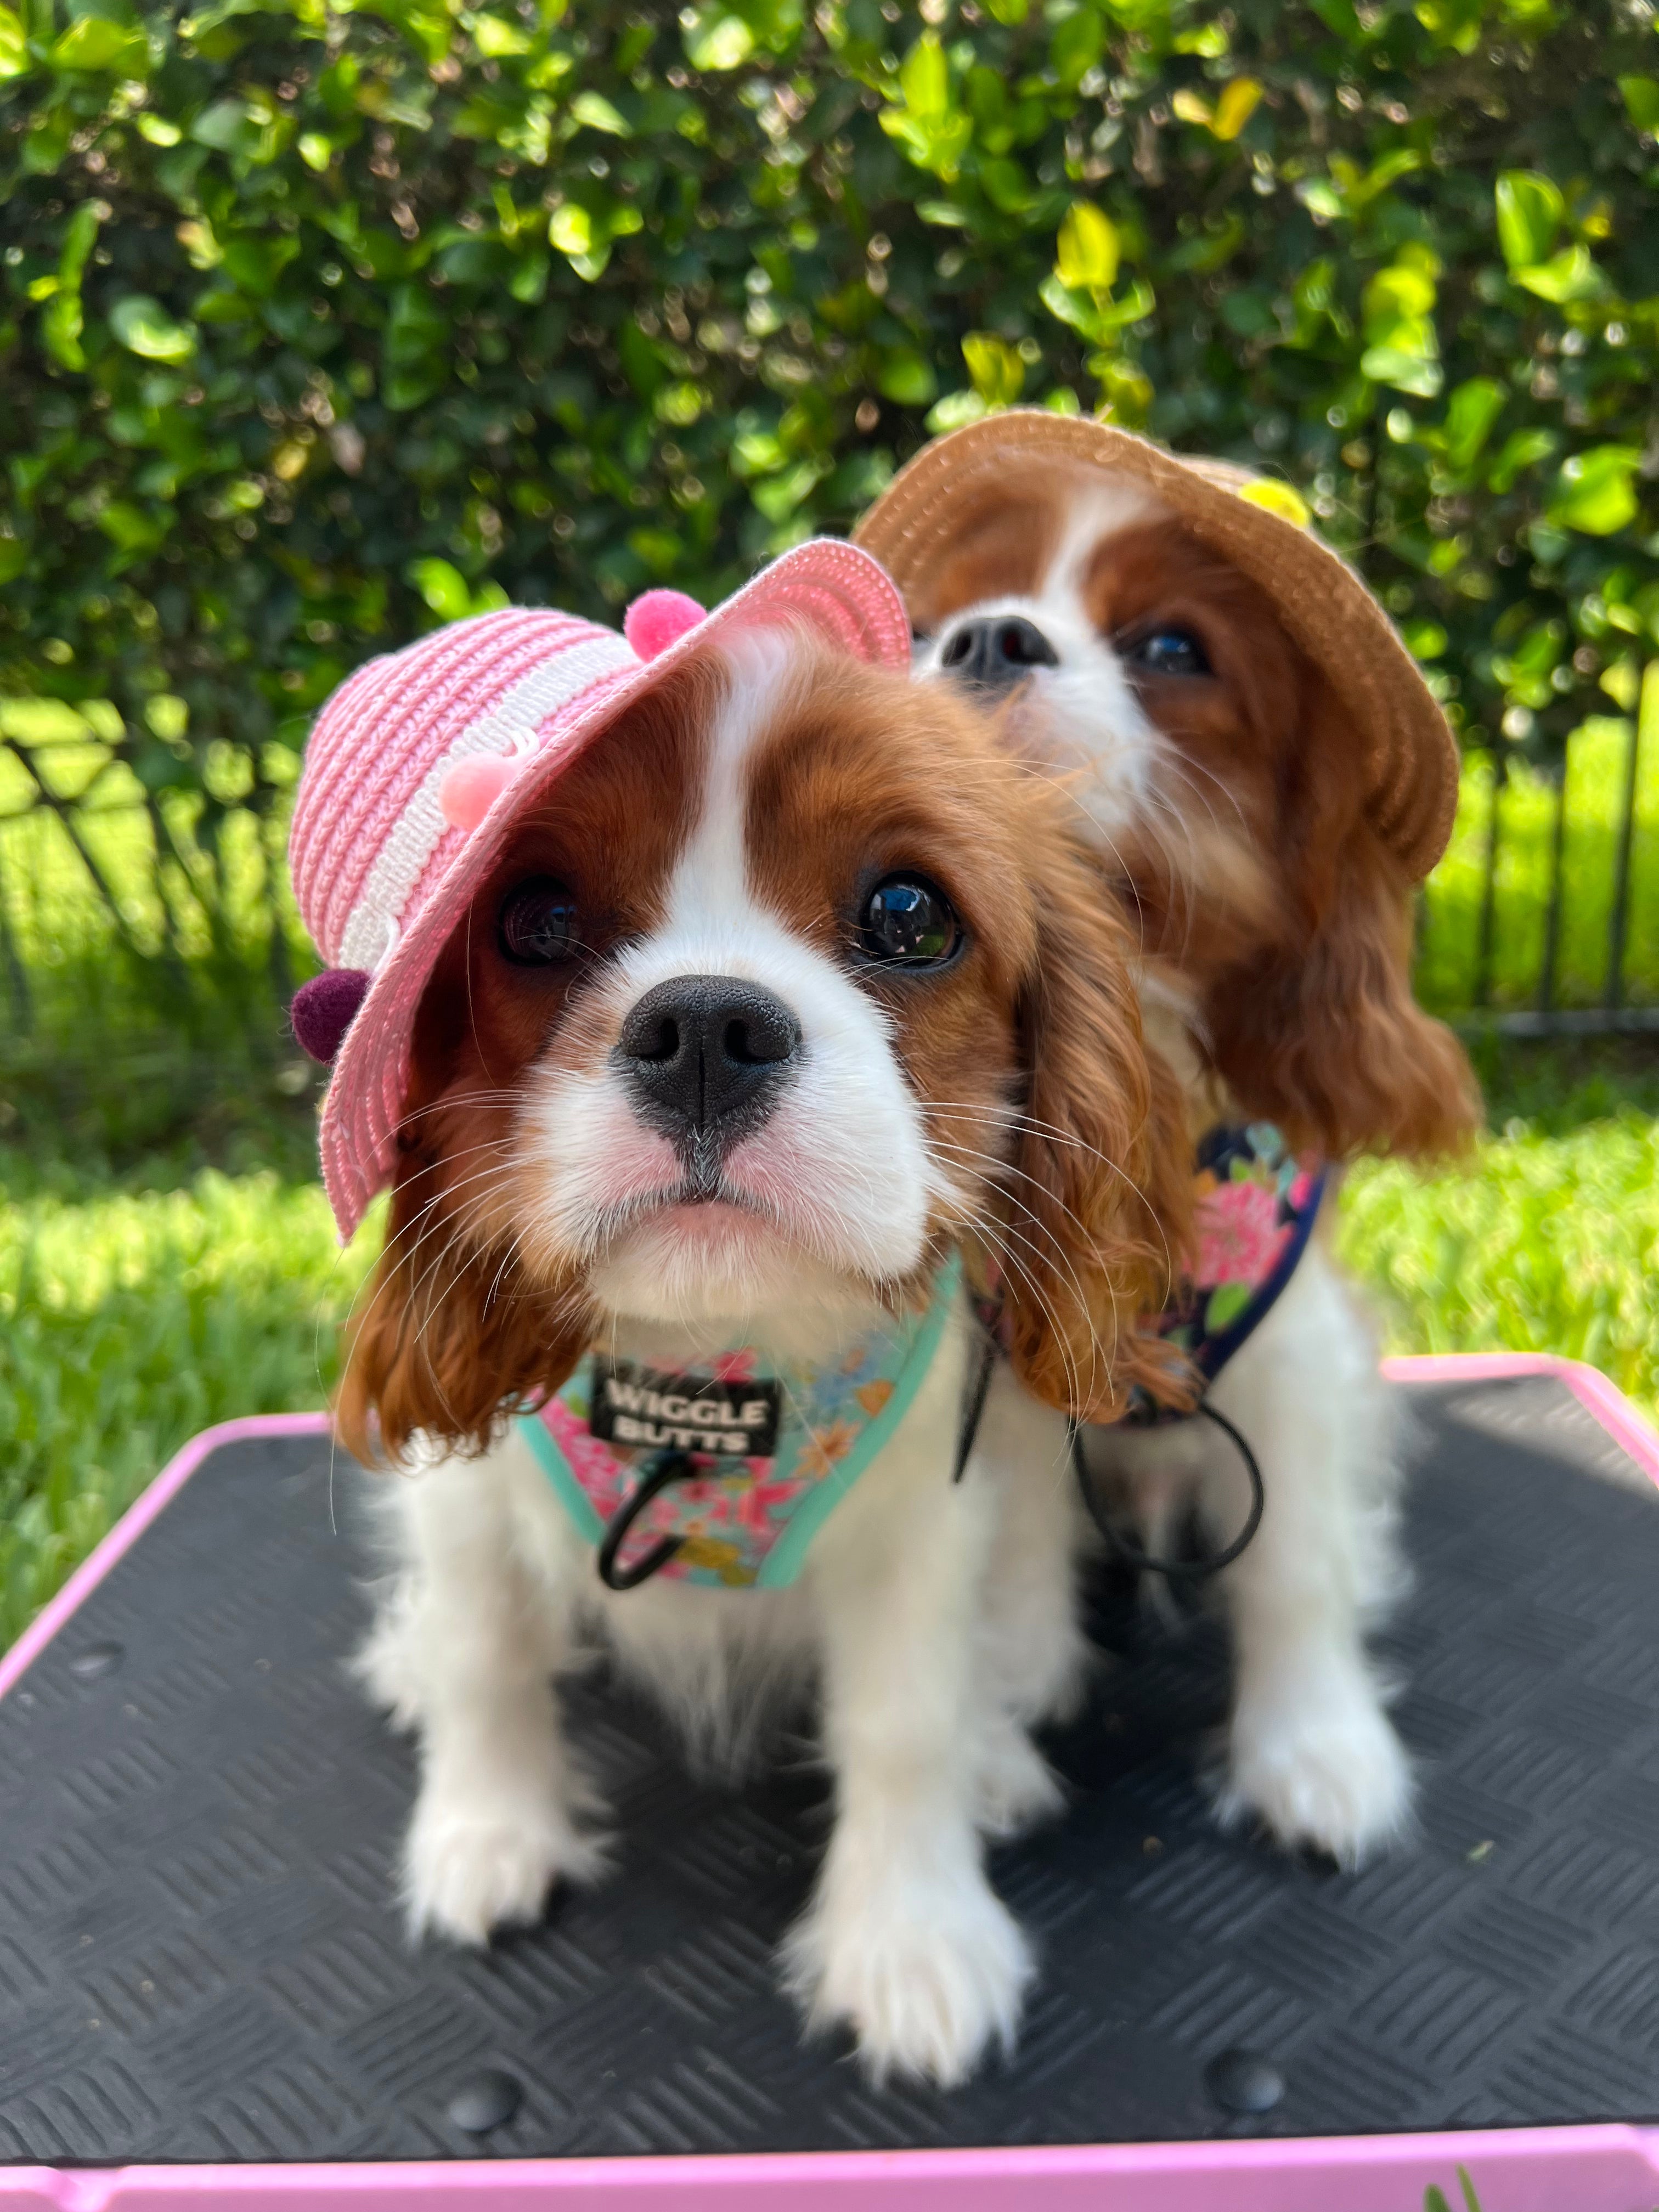 Dogs wearing cute harnesses and tiny hats